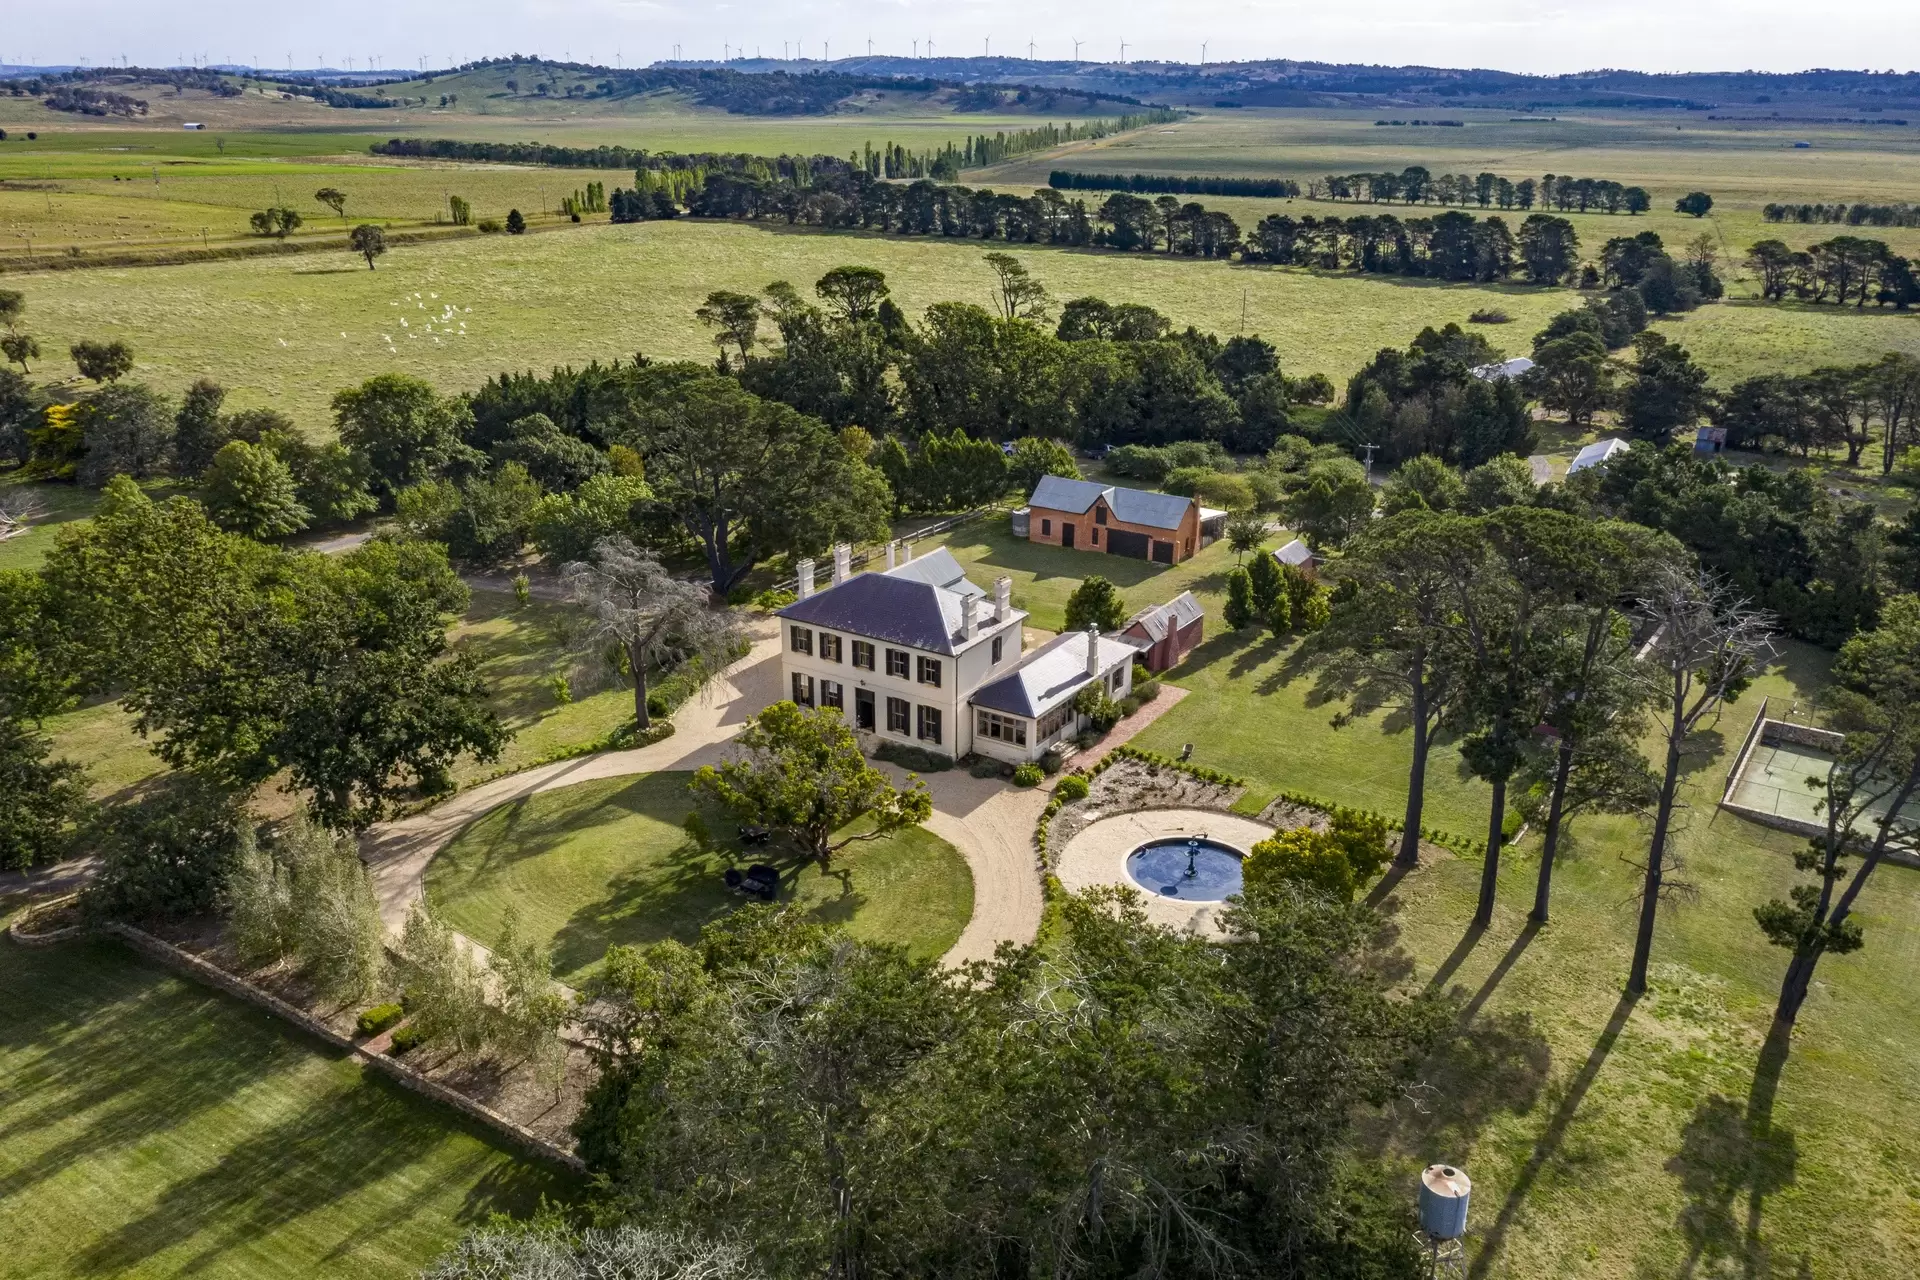 Photo #1: 157 Old South Road, Goulburn - Sold by Drew Lindsay Sotheby's International Realty